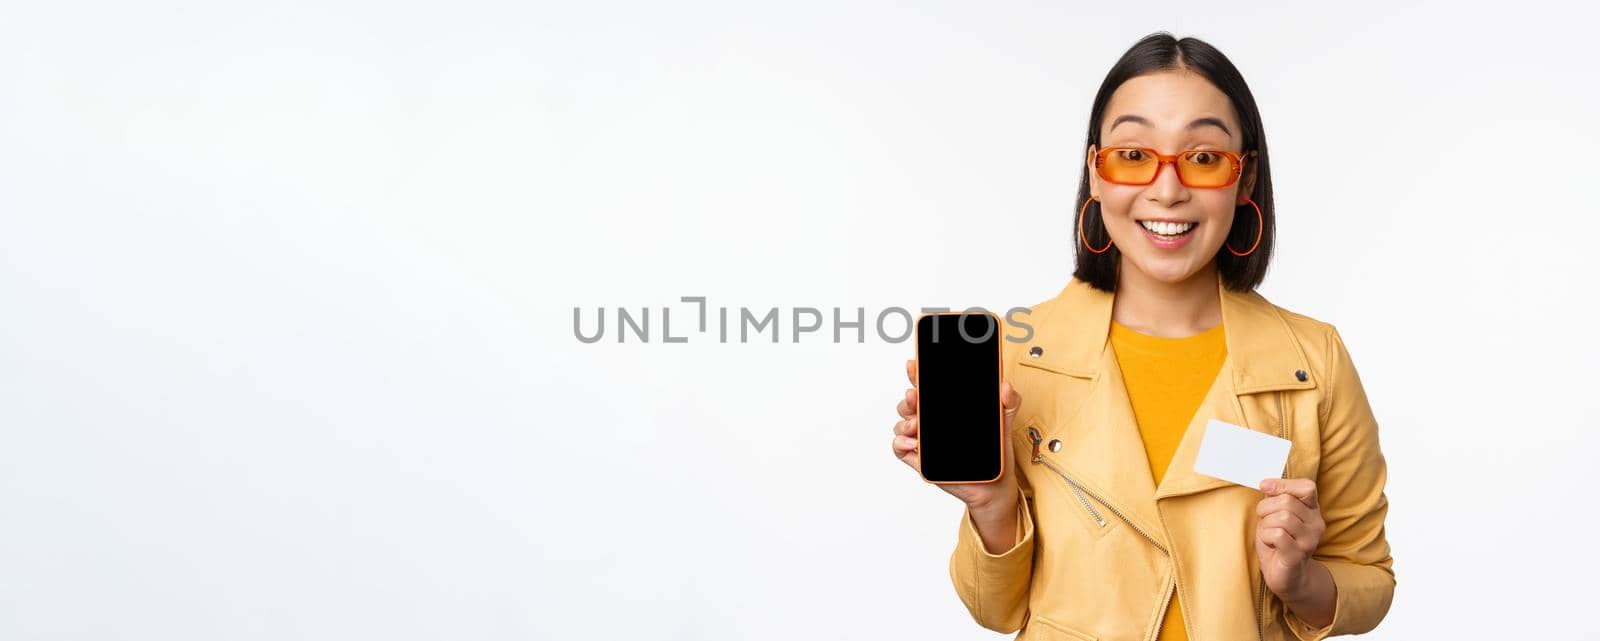 Online shopping and people concept. Stylish asian woman showing mobile phone screen and credit card, smartphone application, standing over white background. Copy space